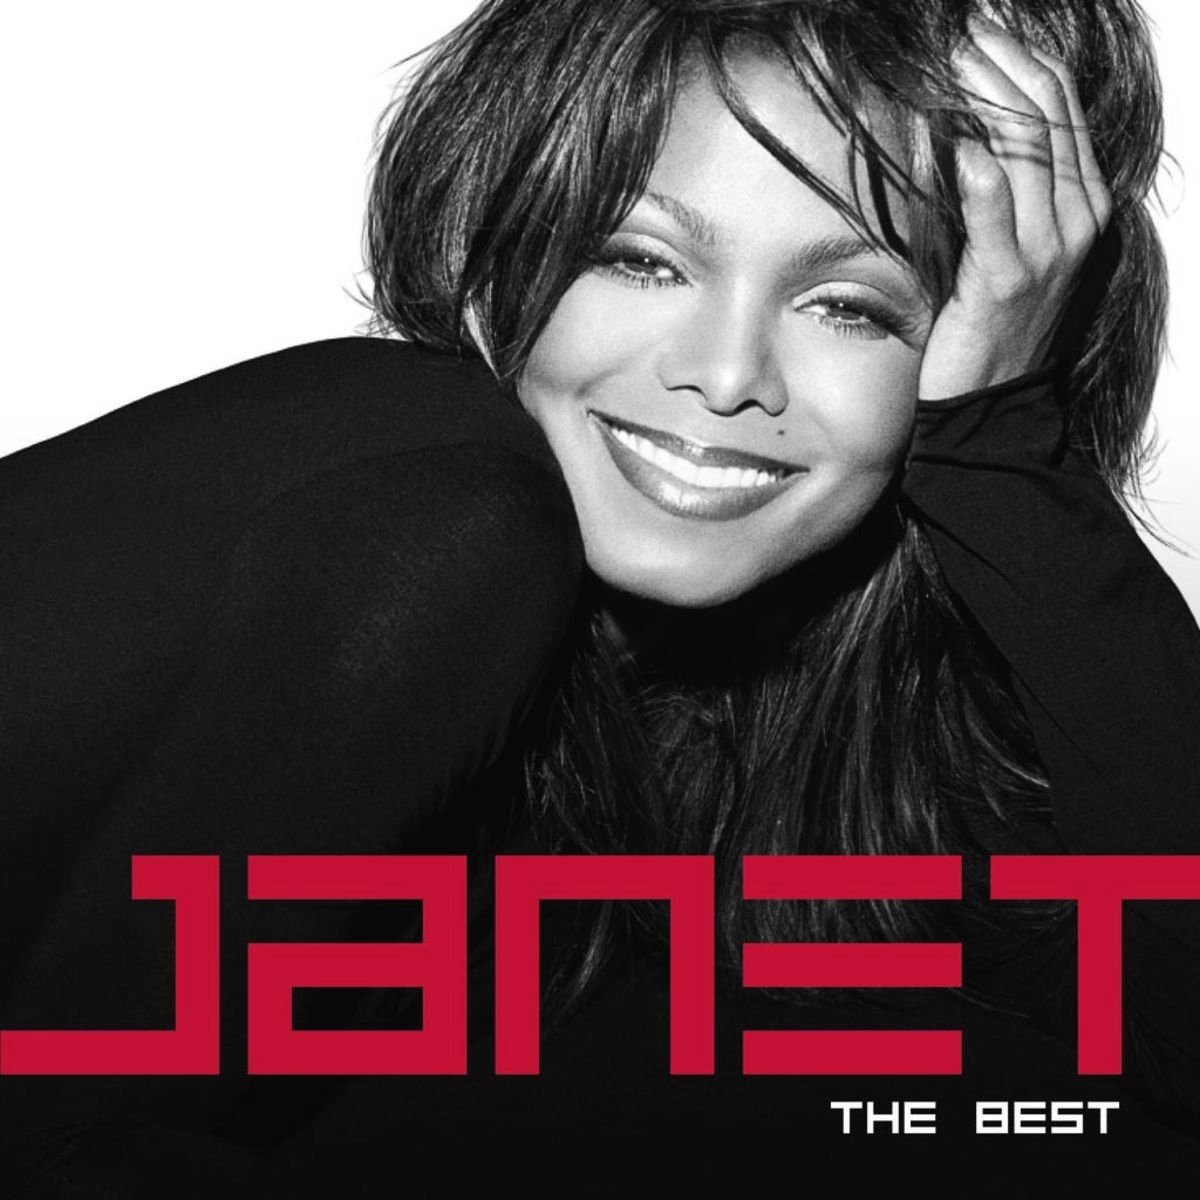 Janet Jackson-The Best-Remastered-2CD-FLAC-2009-THEVOiD Download